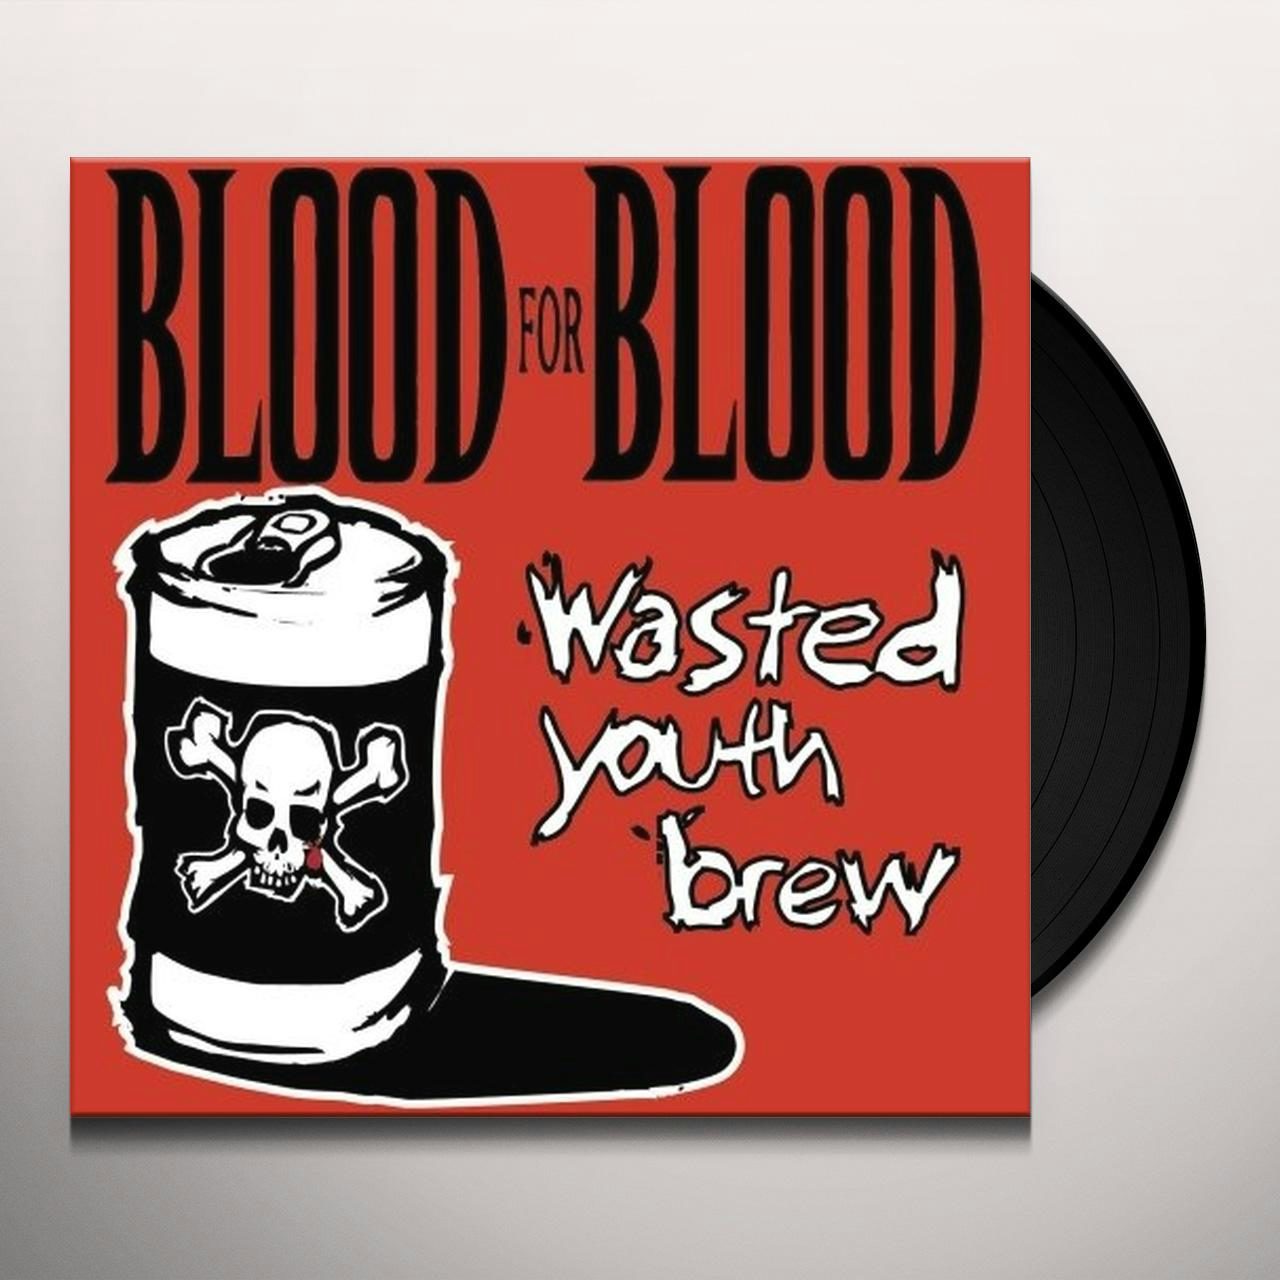 Wasted Youth пиво. Blood for Blood Band. I have come for your Blood.